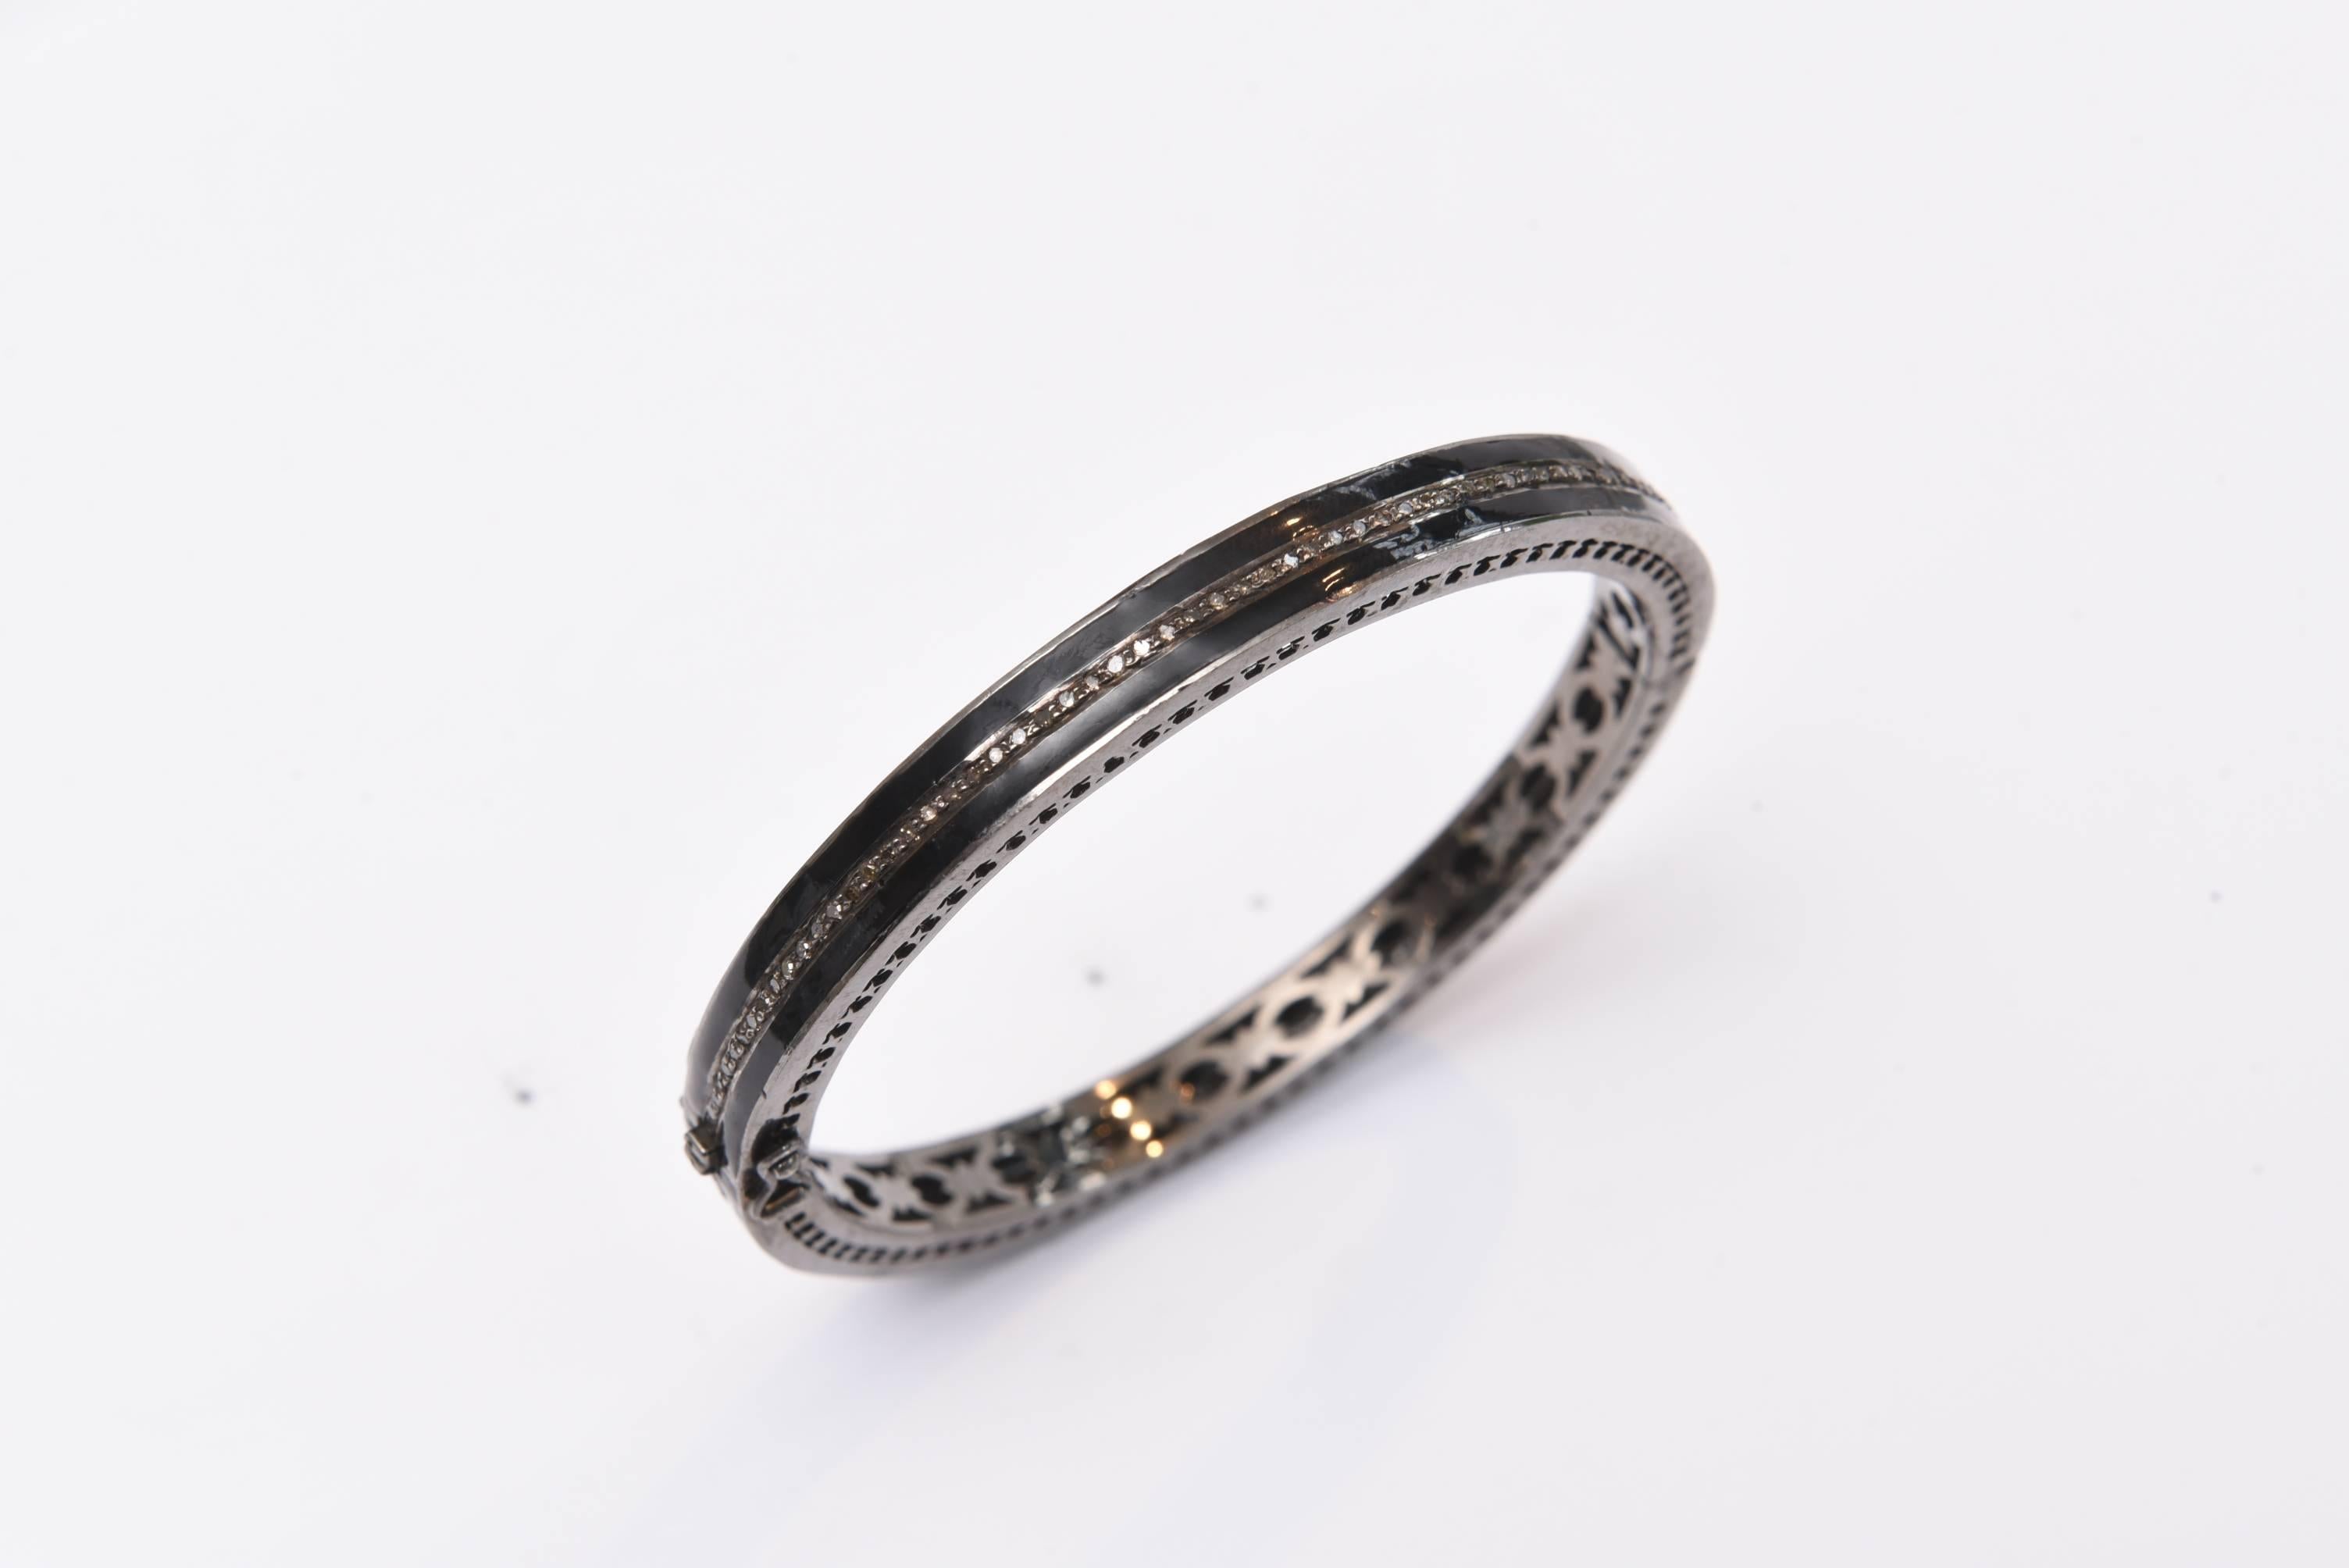 Black enamel bangle which opens, bordered in oxidized sterling silver with diamond running through the middle.  Push clasp with two safeties.  Carat weight of diamonds is 1.15.  Inside circumference is 7 inches.

